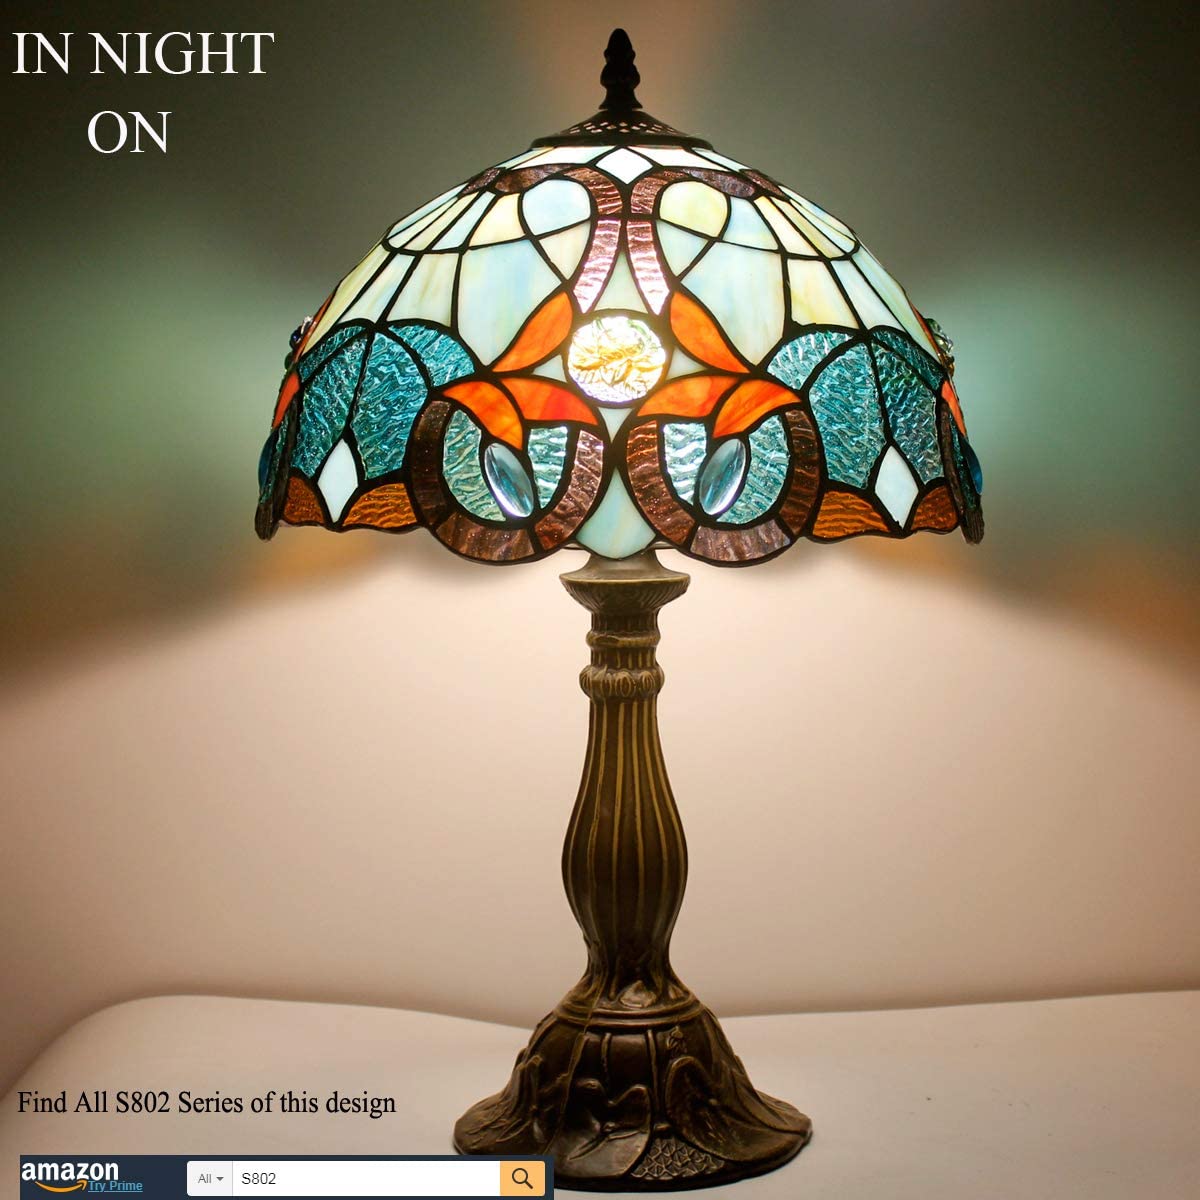 SHADY  Table Lamp Stained Glass Bedside Lamp Green Blue Floral Desk Reading Light 12X12X18 Inches Decor Bedroom Living Room Home Office S802 Series